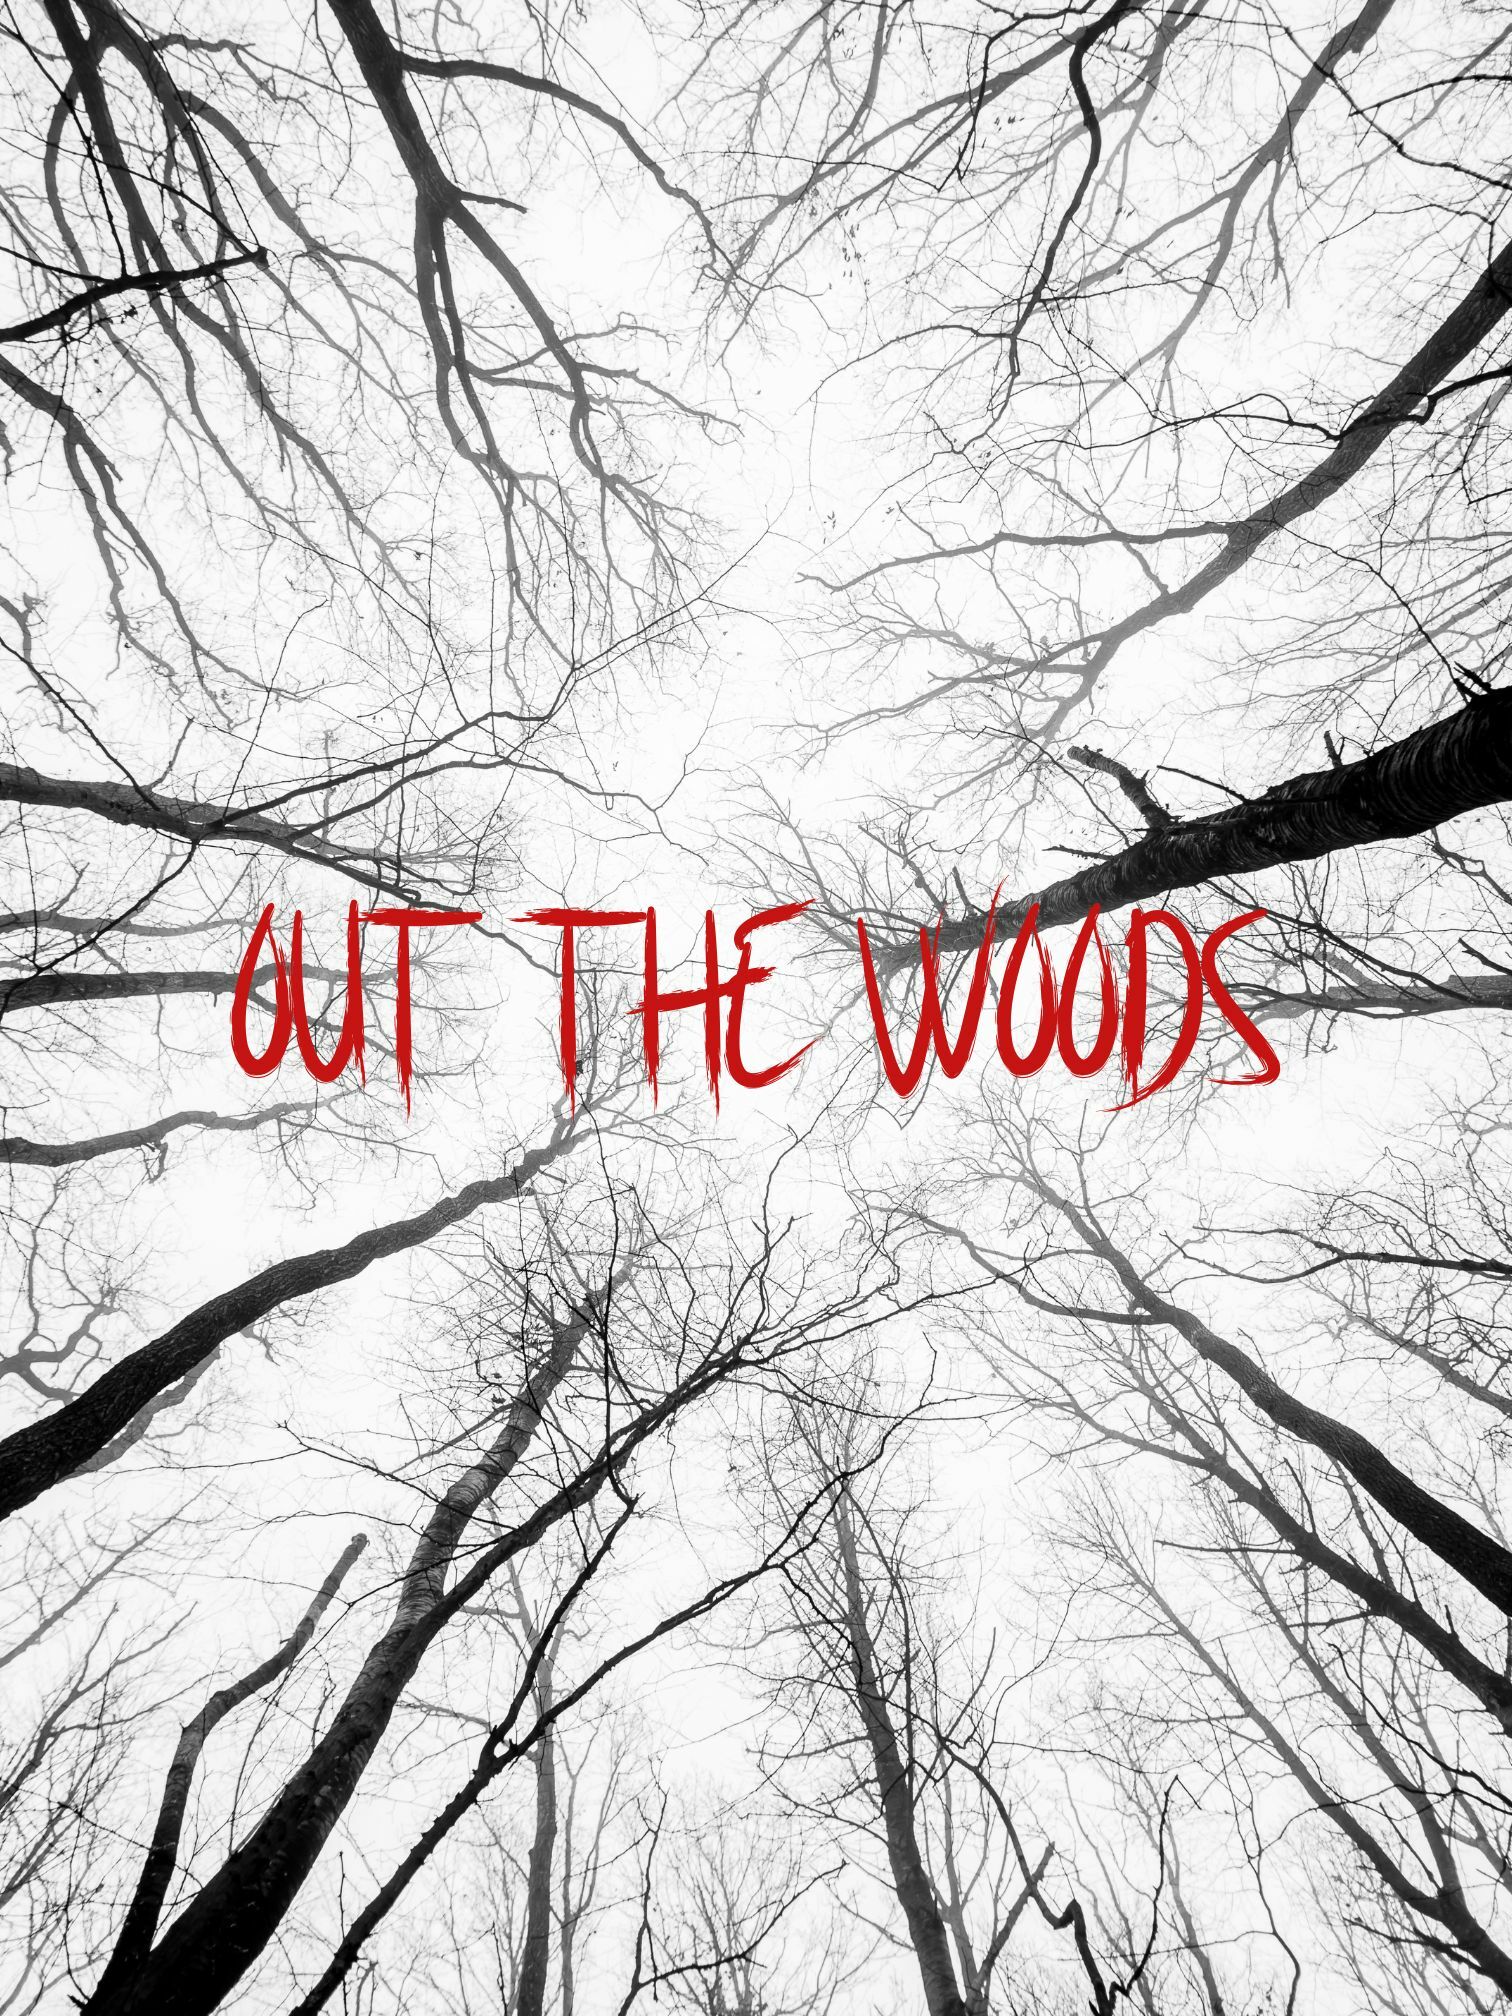 OUT THE WOODS